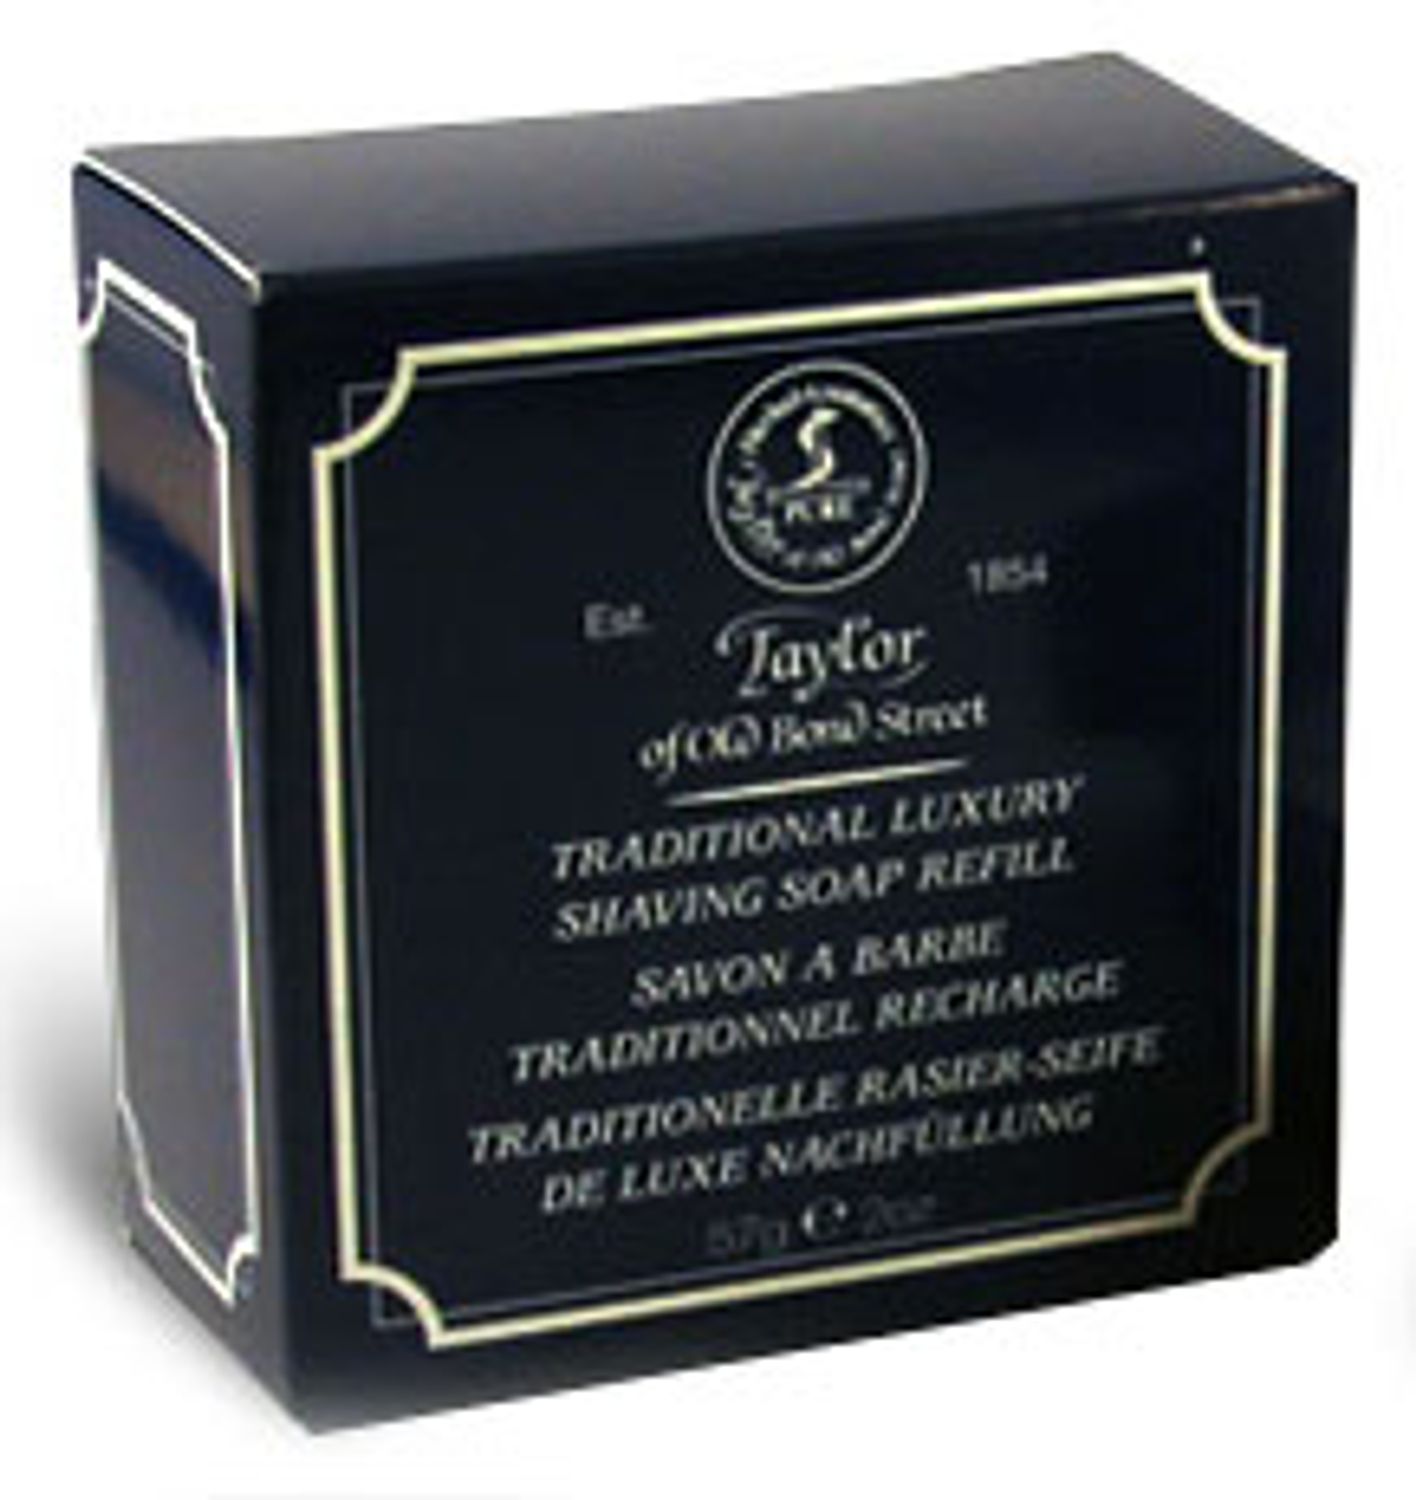 - Traditional Refill 2 Bond Old Shave Soap 01052 Street Taylor Luxury (57g) of - KnifeCenter oz.